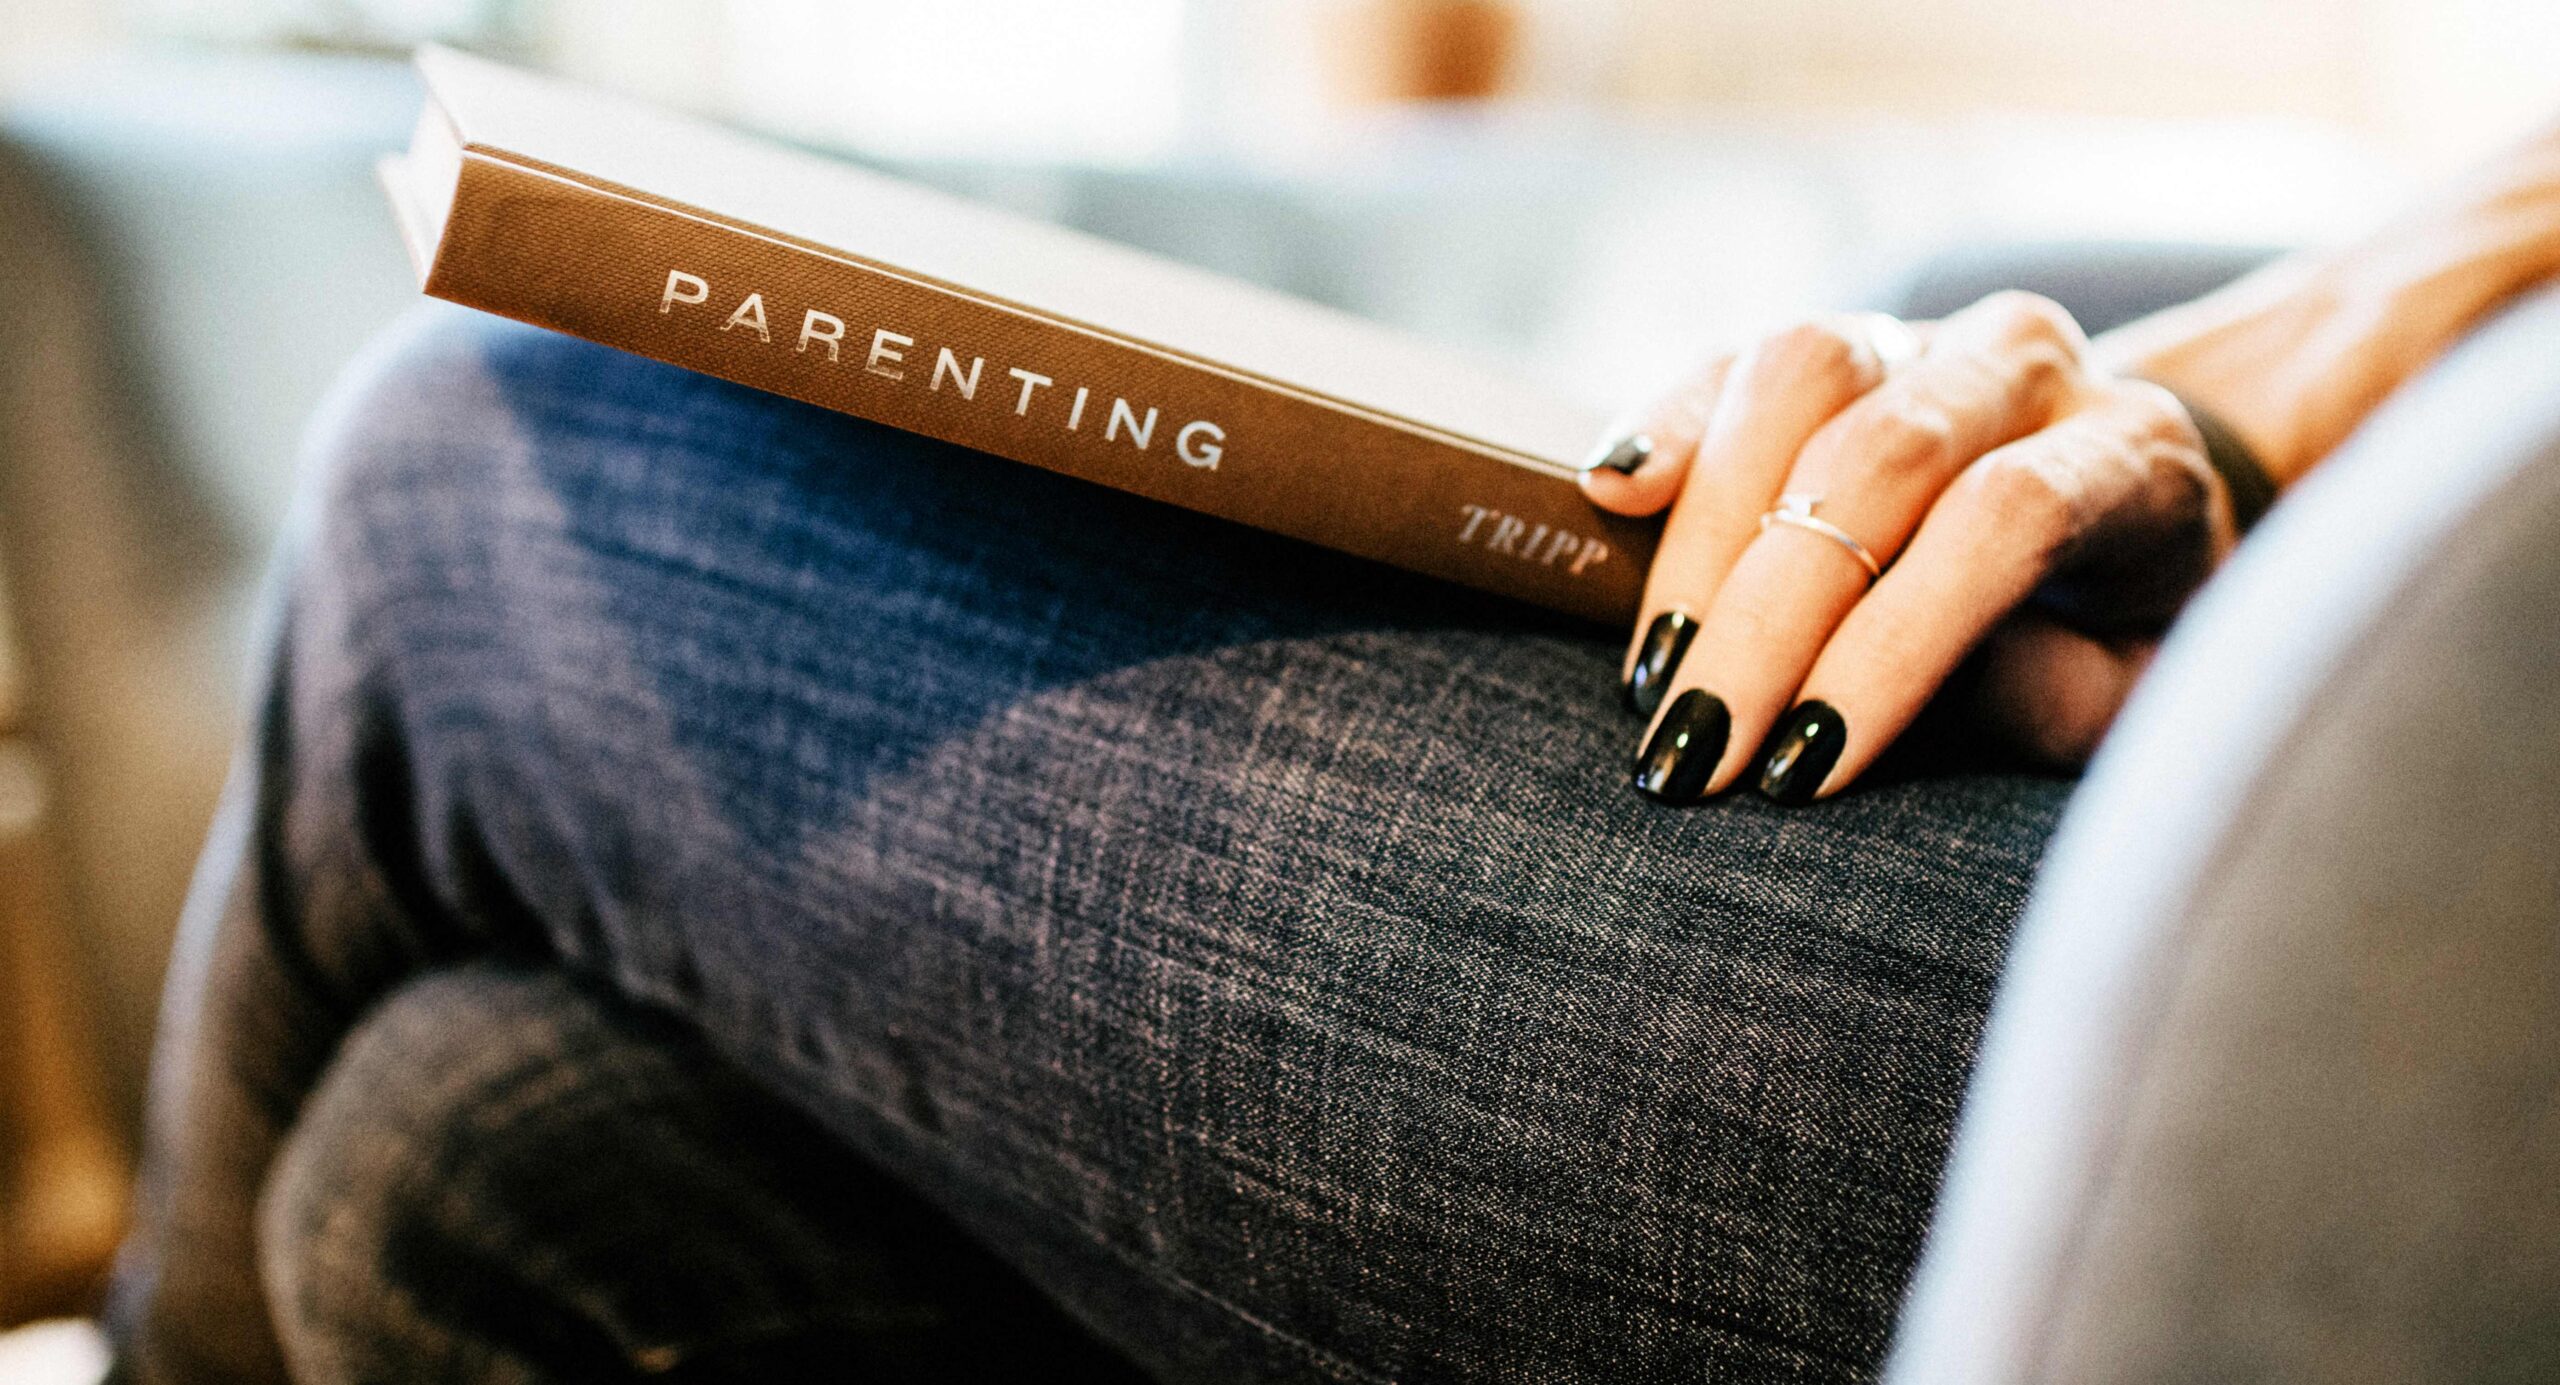 Someone sitting with a book on her lap, the word "parenting" on the spine of the book.